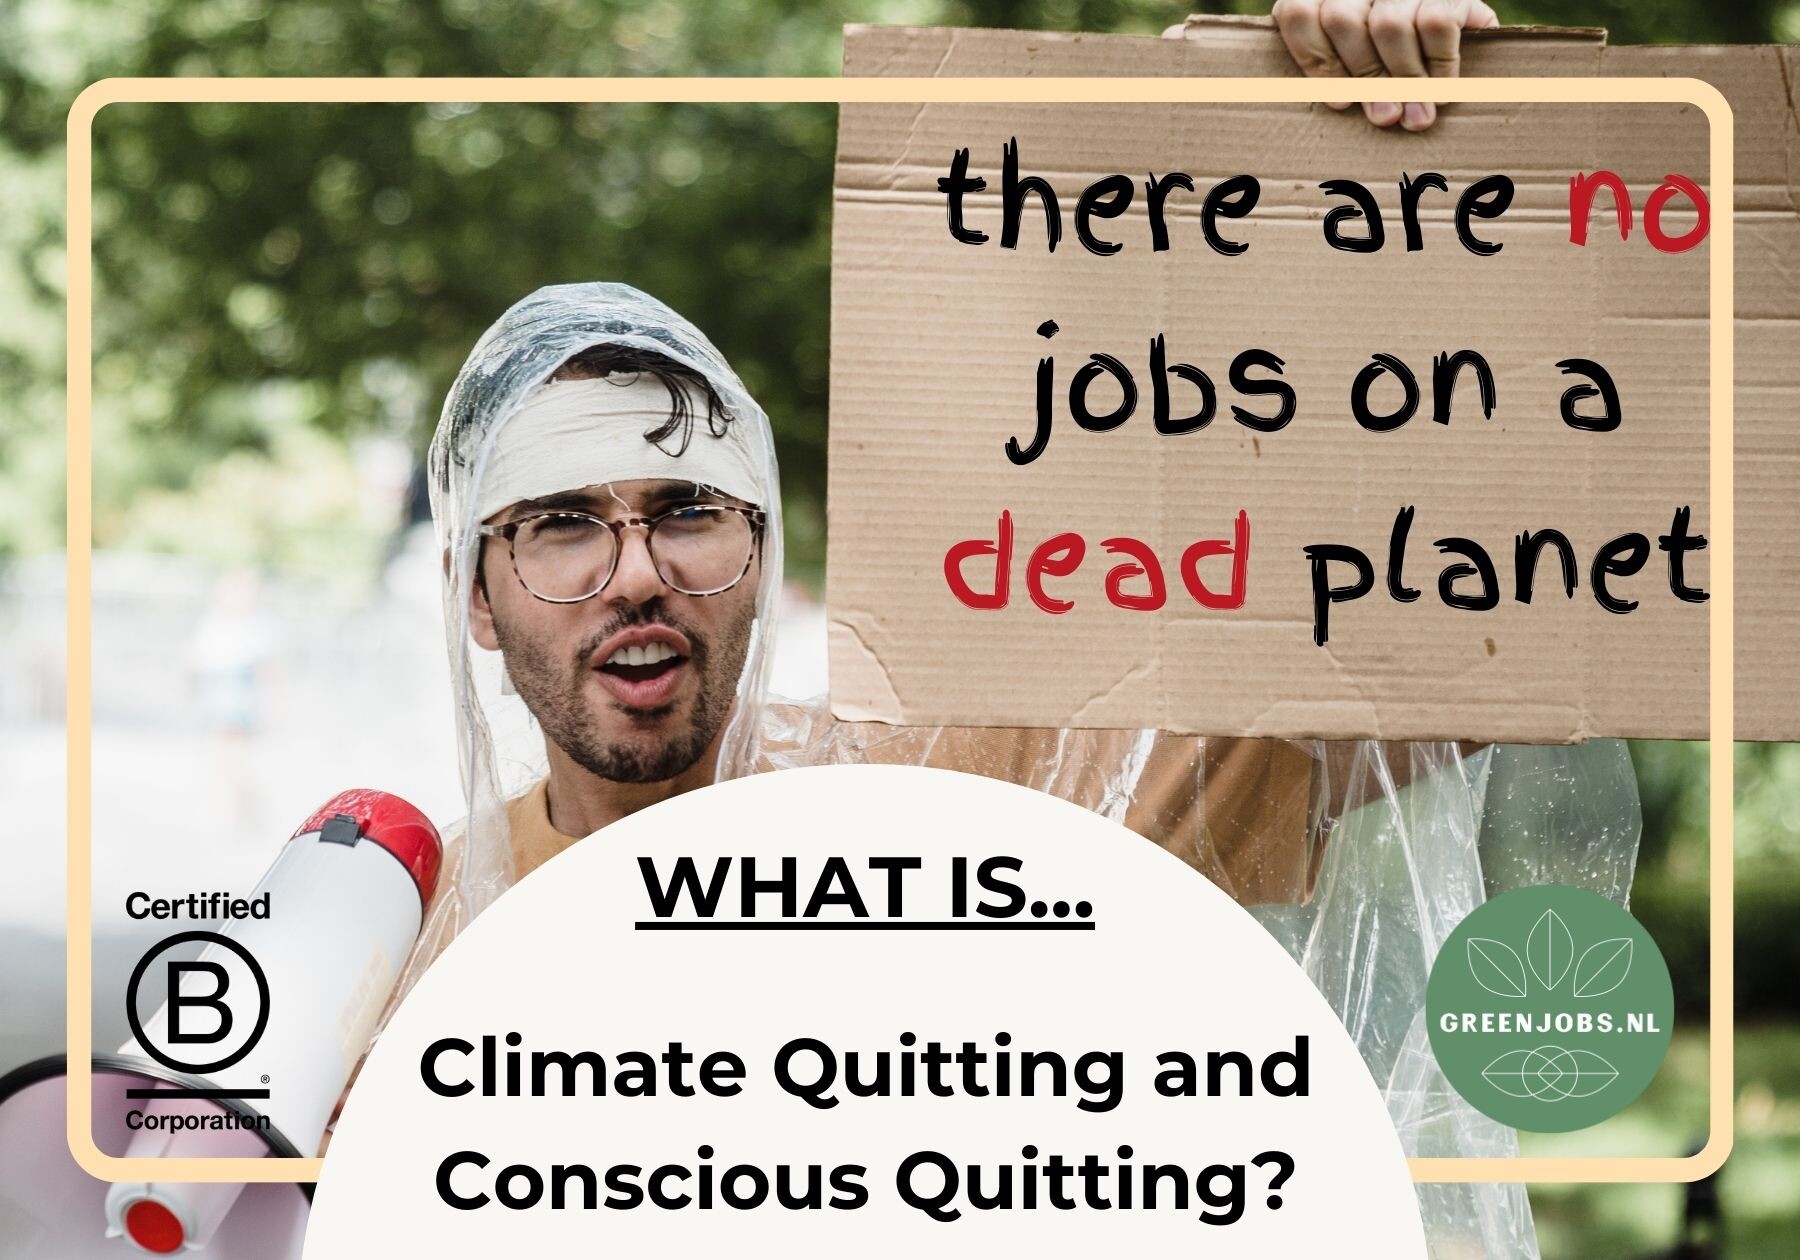 What is Climate Quitting and Conscious Quitting?